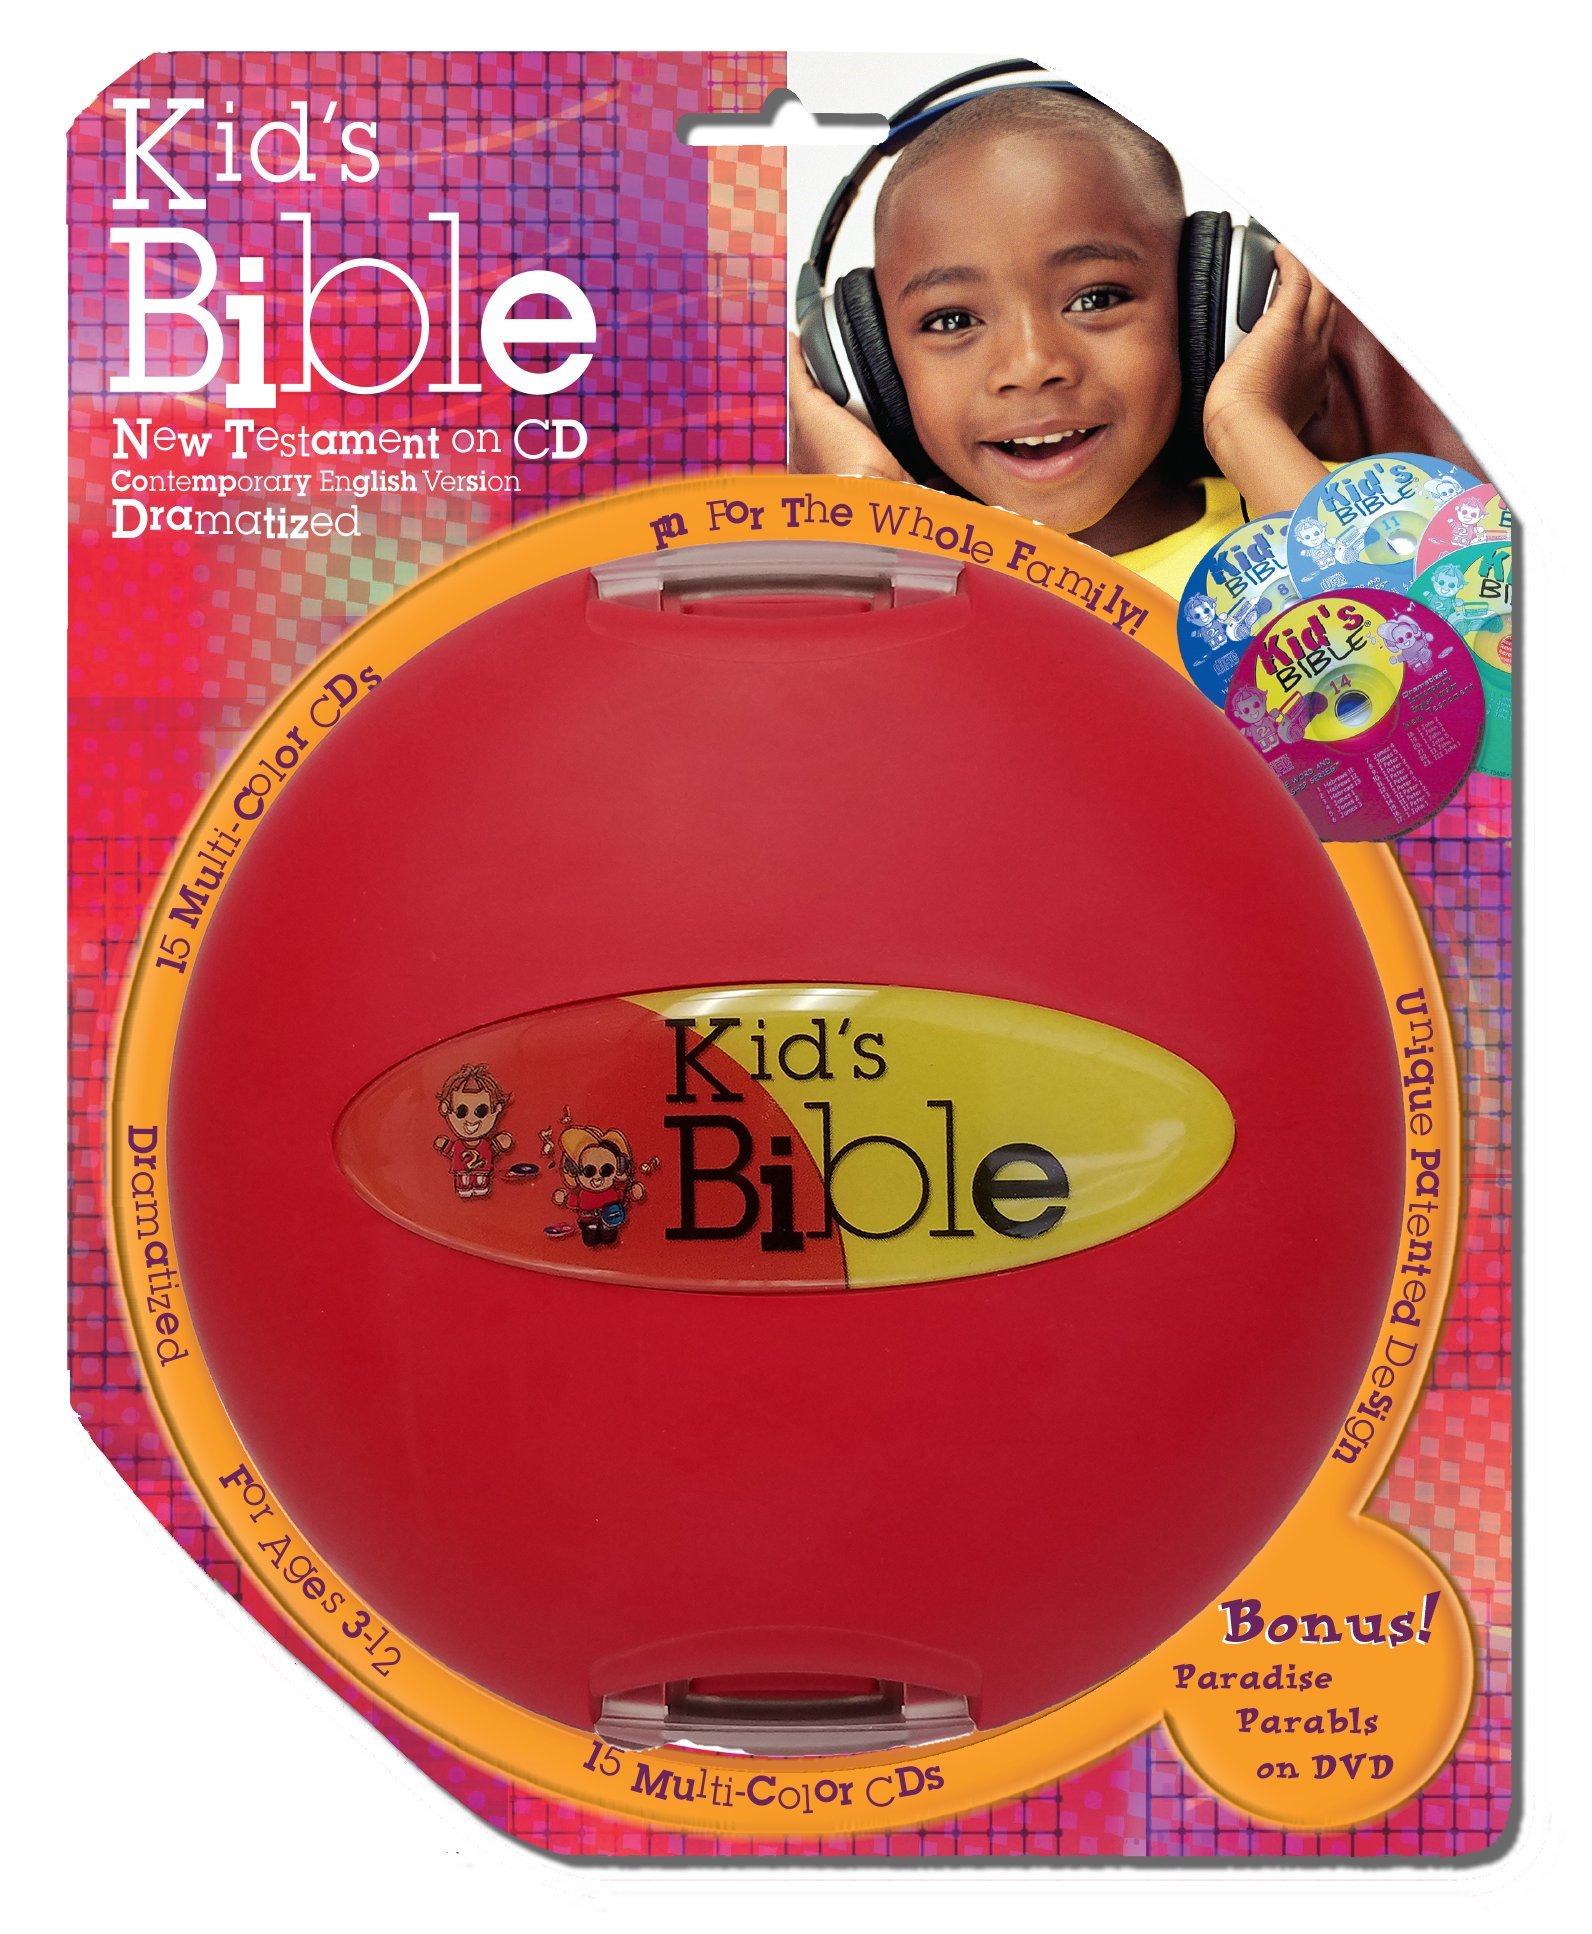 Kid's Audio Bible-327 New Testament Bible Stories for Children-100 Children's Bible Songs-Dramatized Audio Bible-Christian Music for Kids Children ... Apostle-St. Mark (Word and Worship Series)